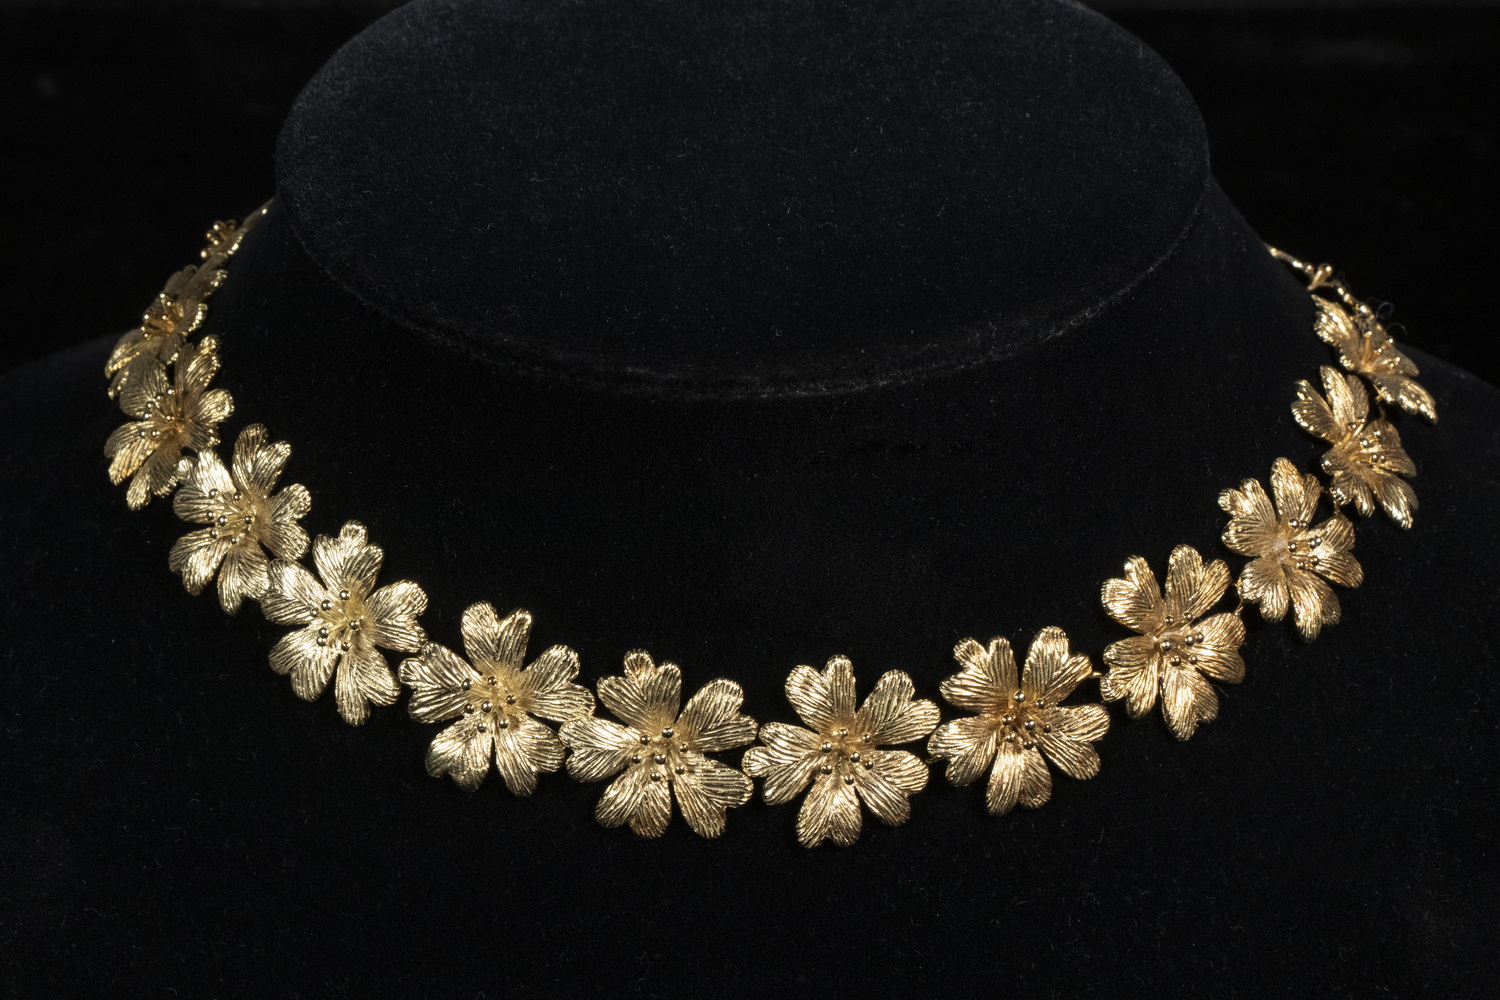 GOLD FLOWER FORM NECKLACE 14K Yellow